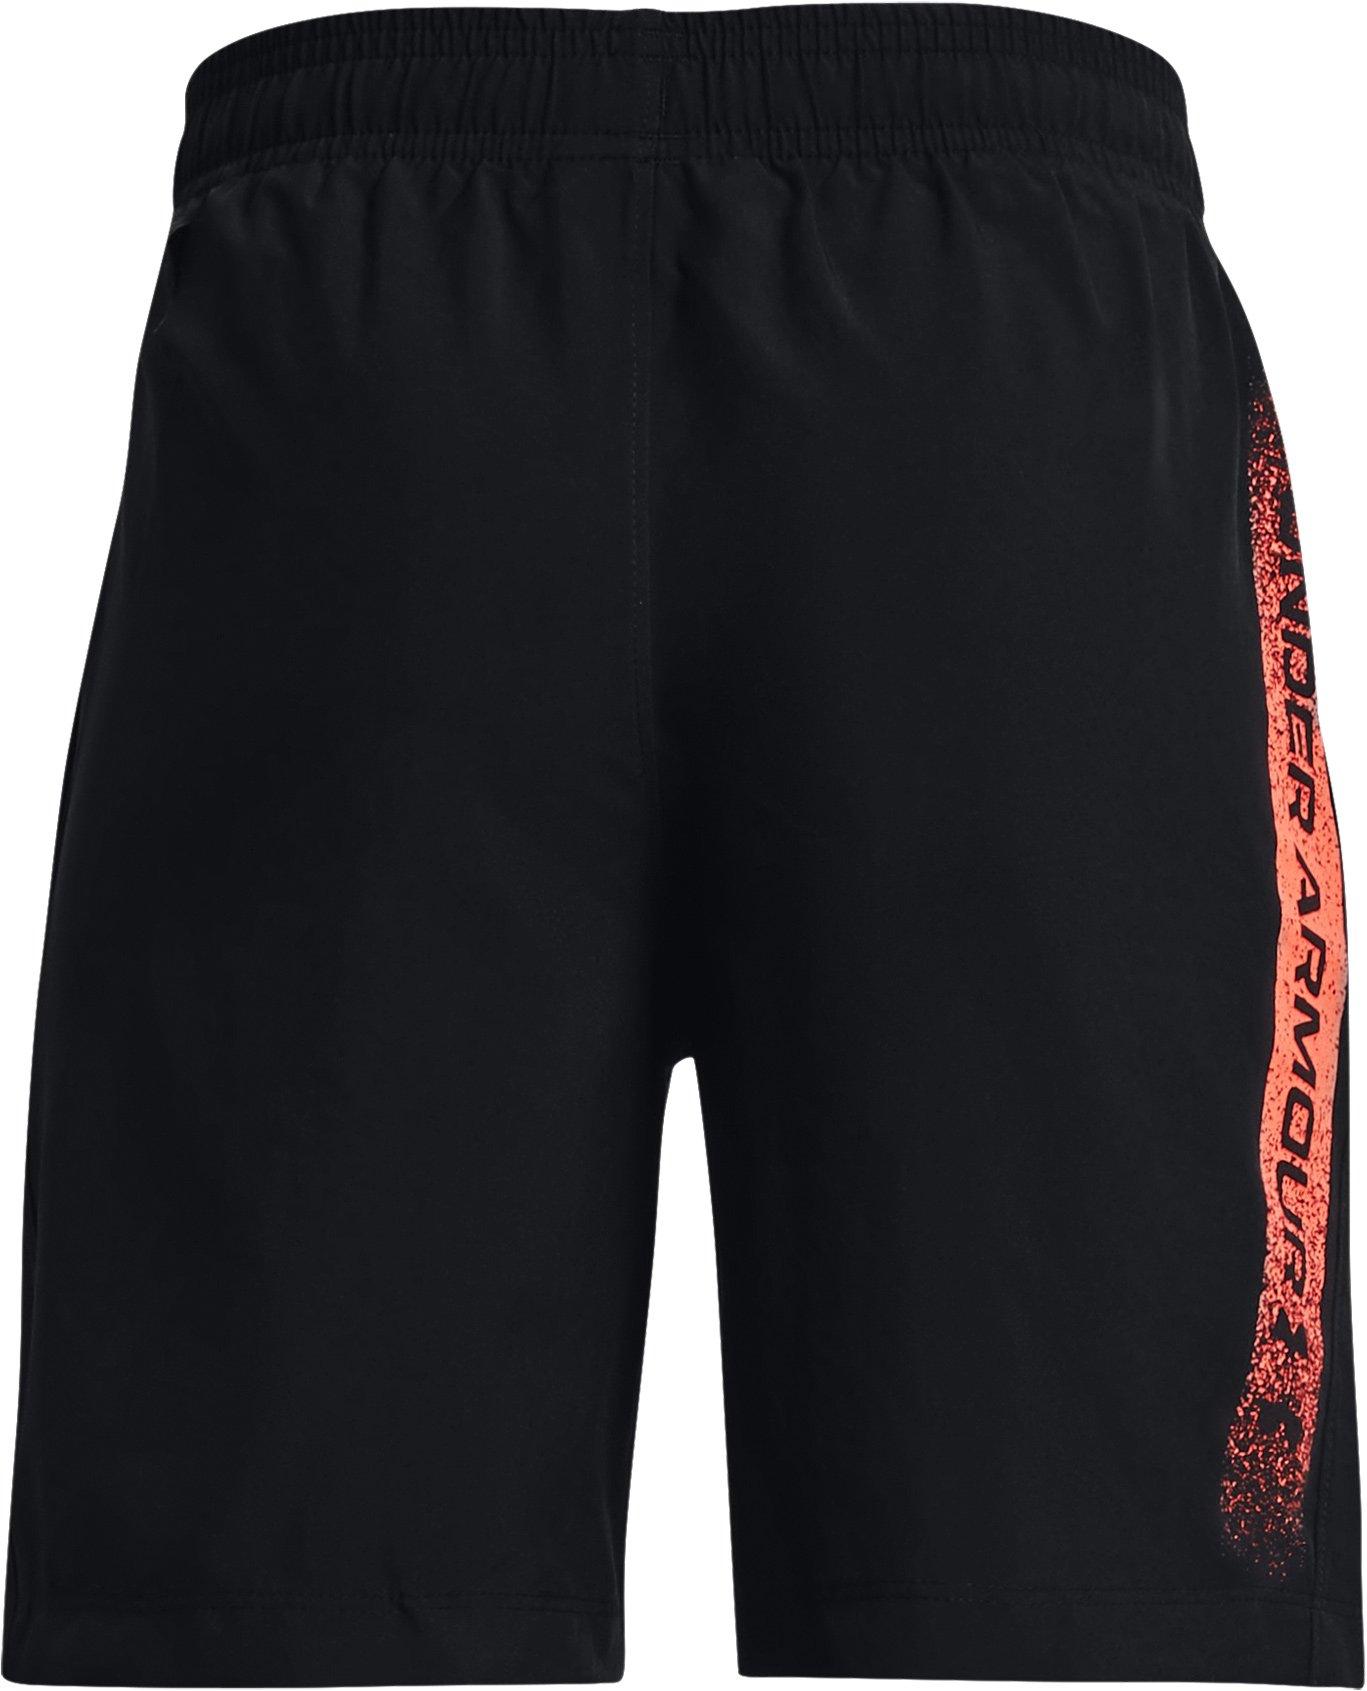 Under Armour Woven Graphic Shorts-BLK S